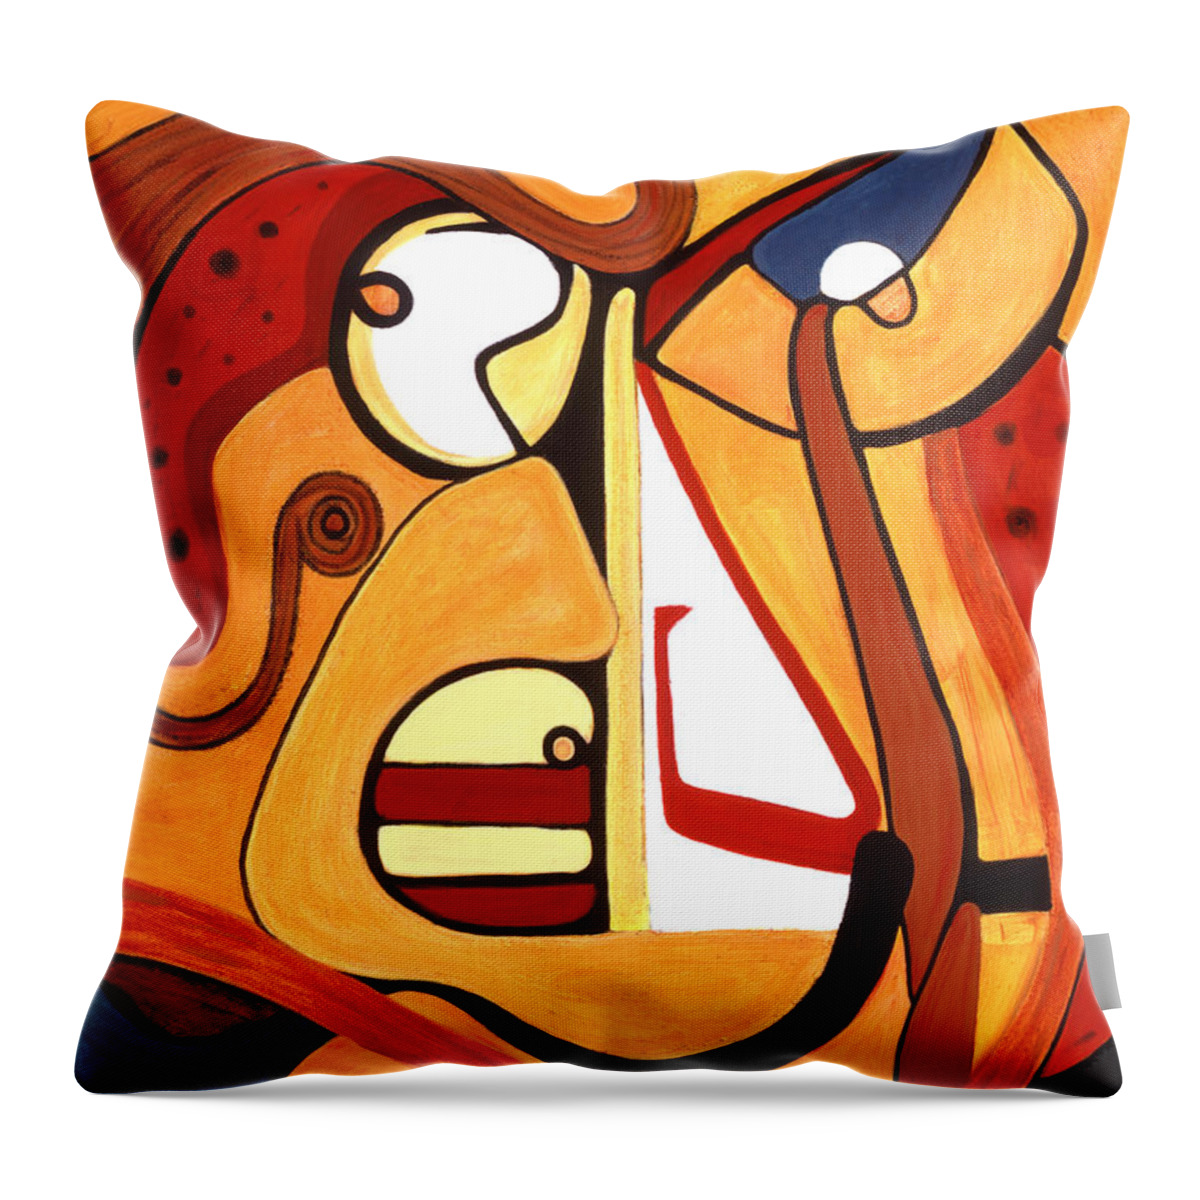 Abstract Art Throw Pillow featuring the painting Illuminatus 2 by Stephen Lucas